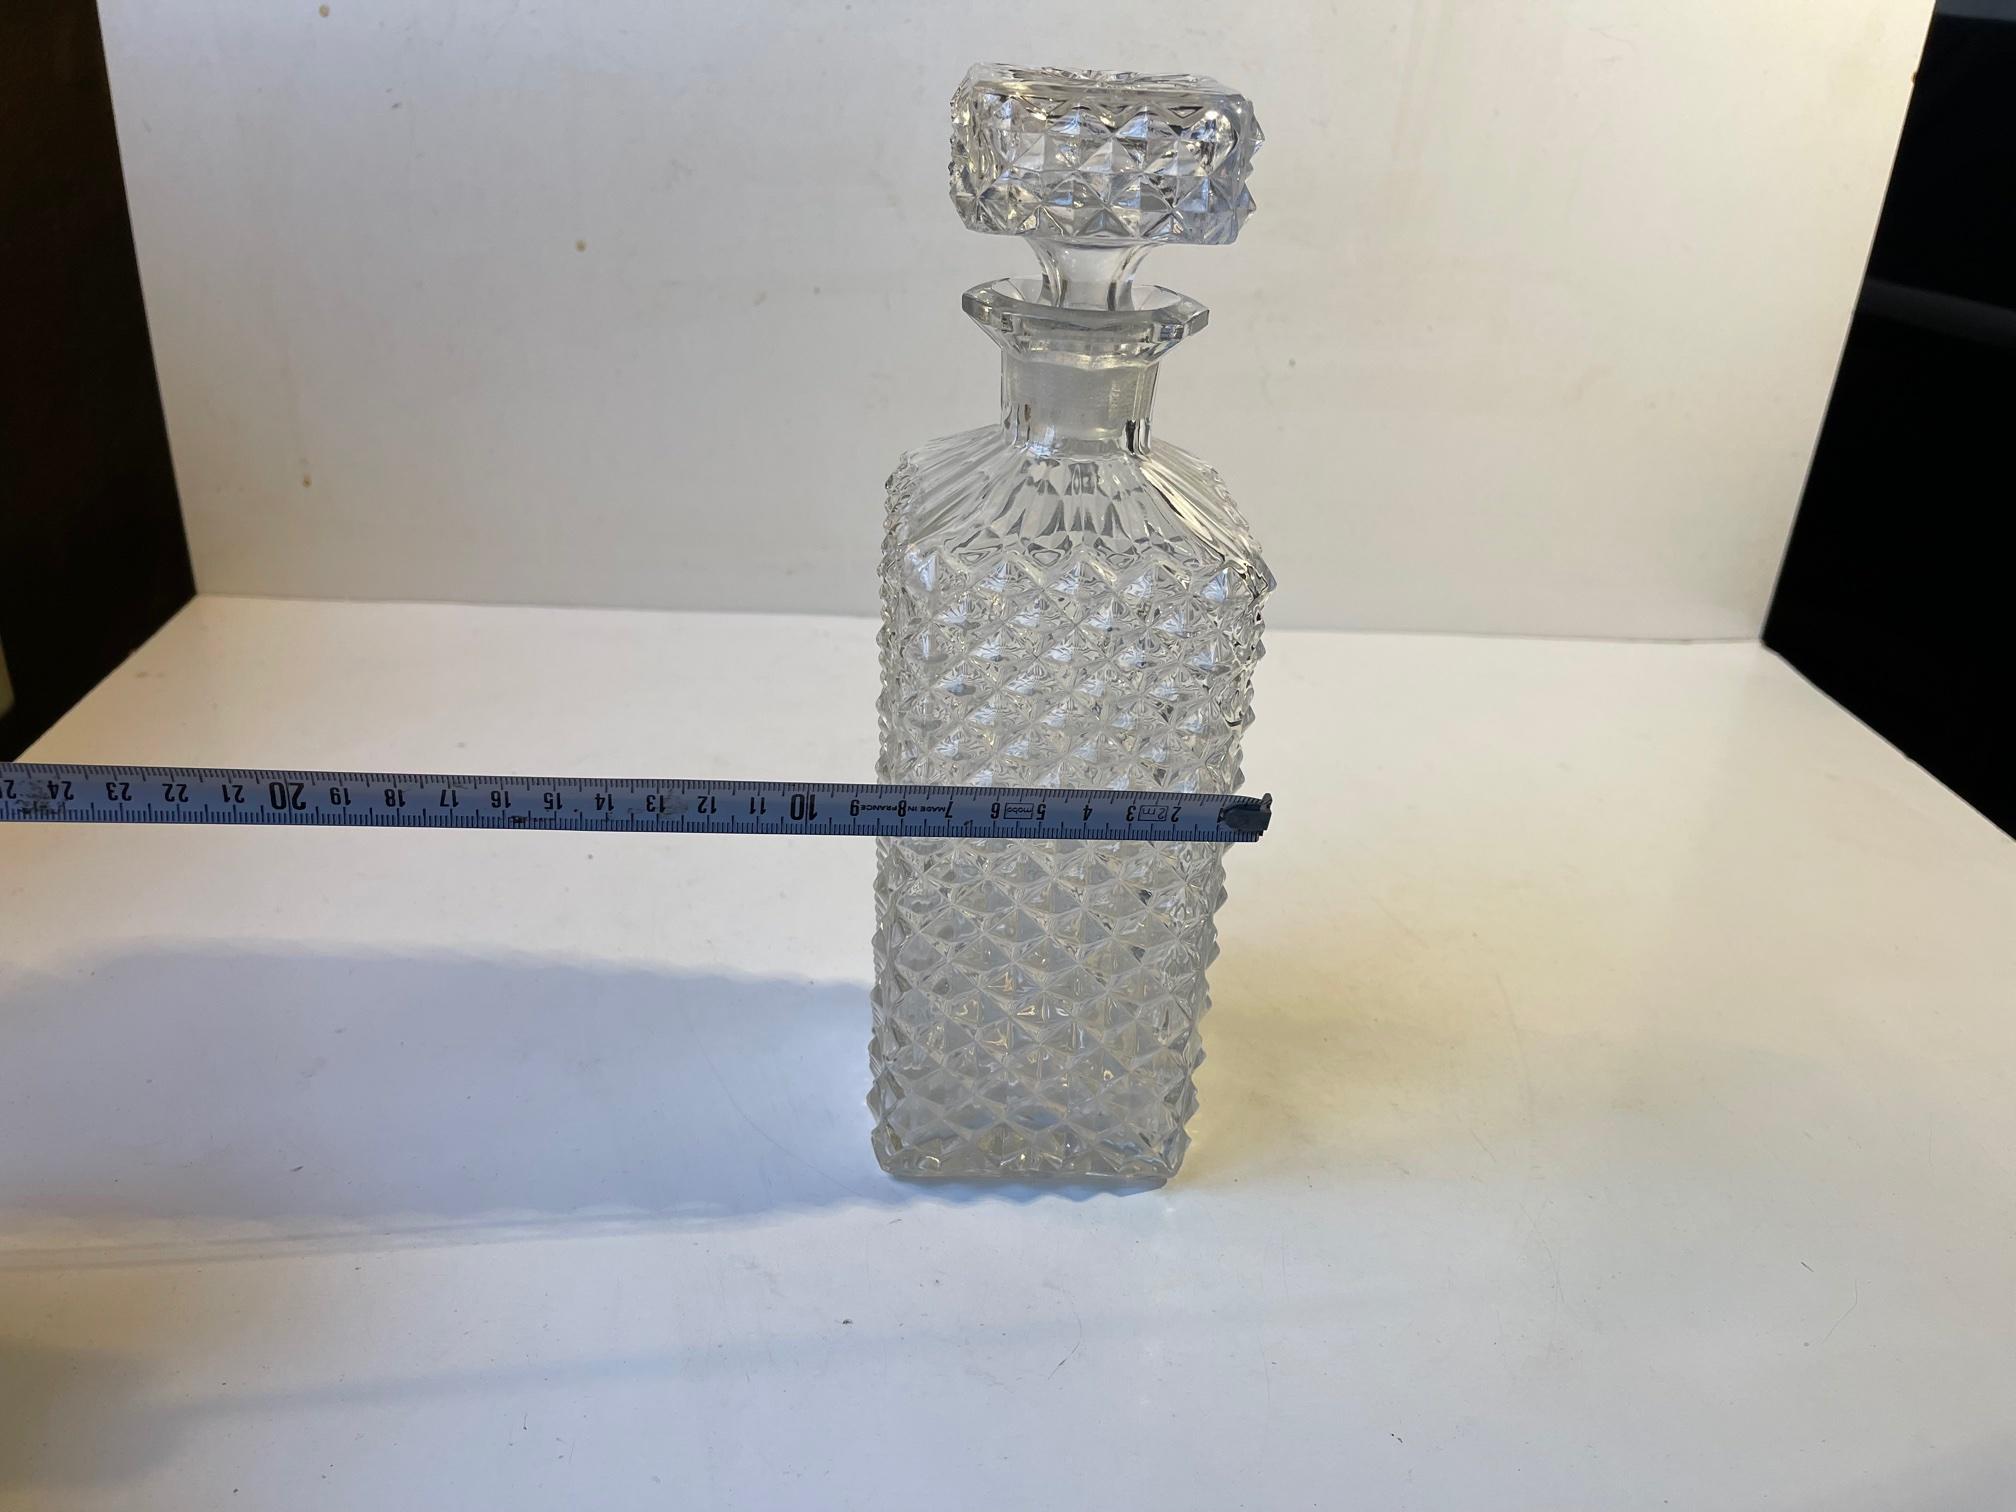 Vintage Scandinavian Diamond Accented Glass Decanter, 1960s In Good Condition For Sale In Esbjerg, DK